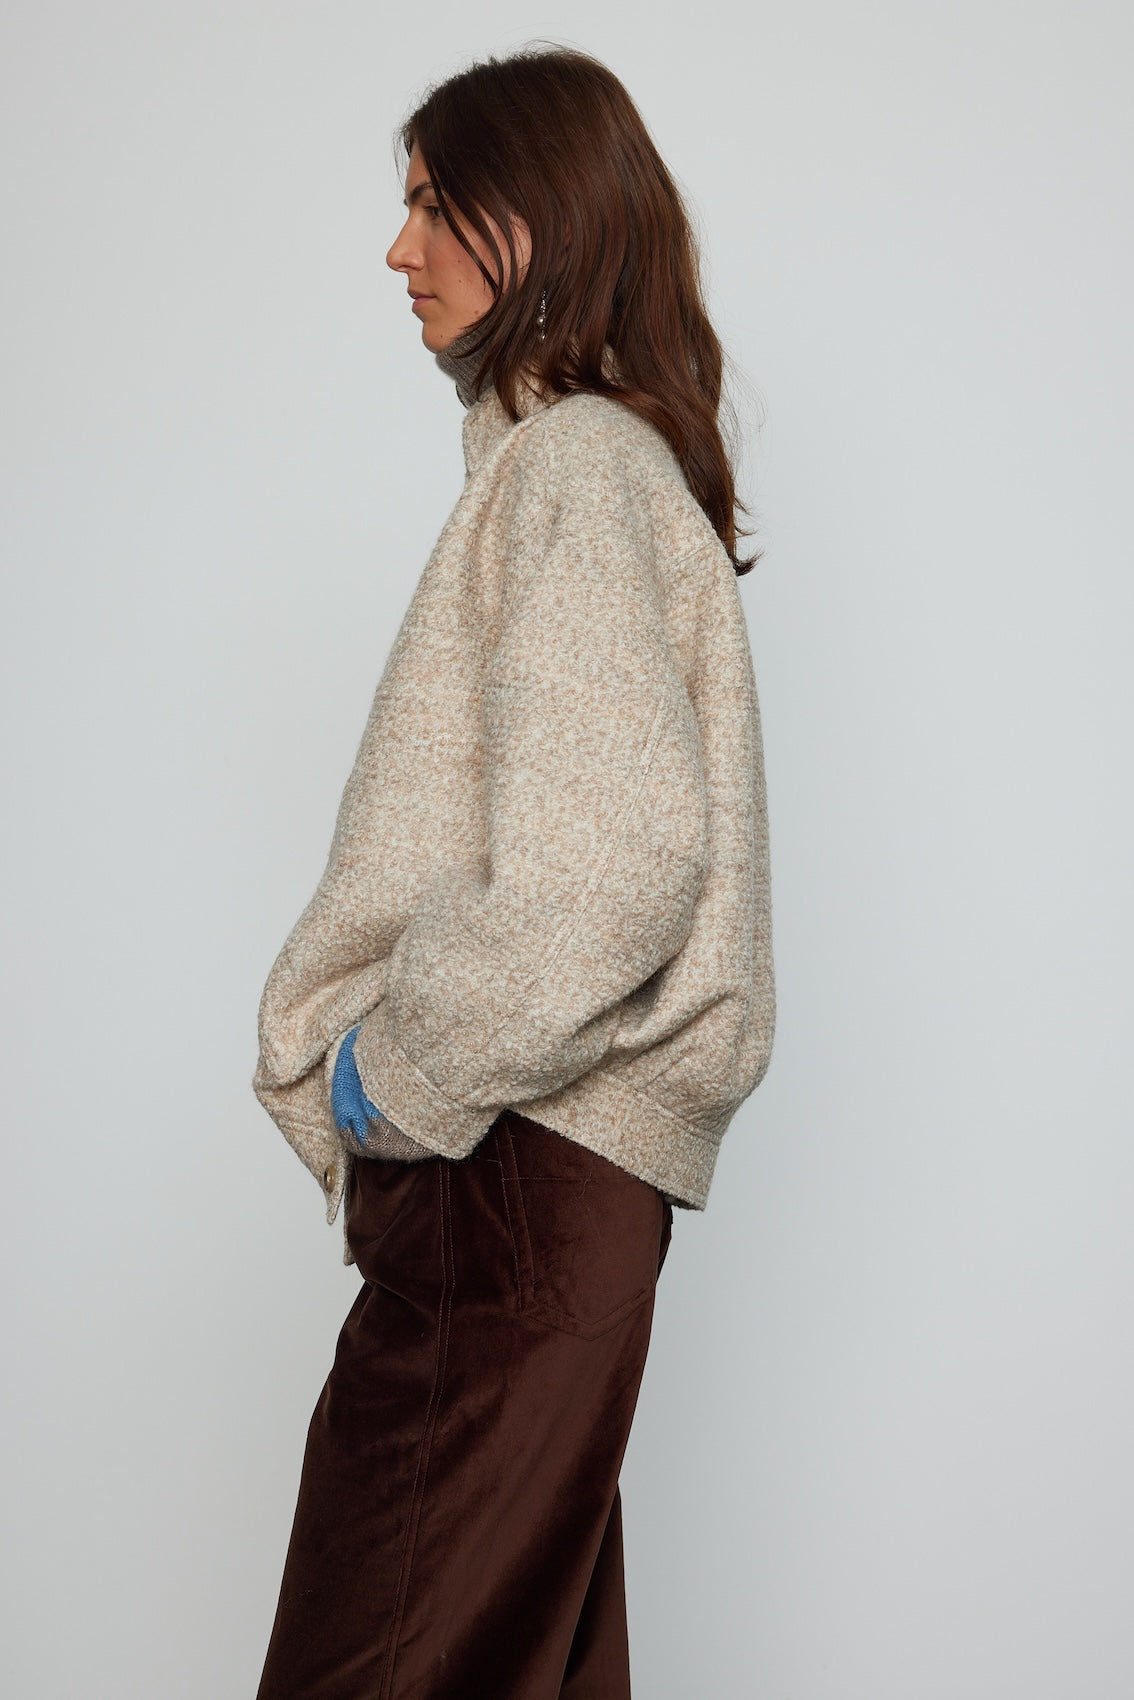 Caro Editions Mimi Jacket in wool boucle. A rounded shape inspired by the 80s with big round buttons.